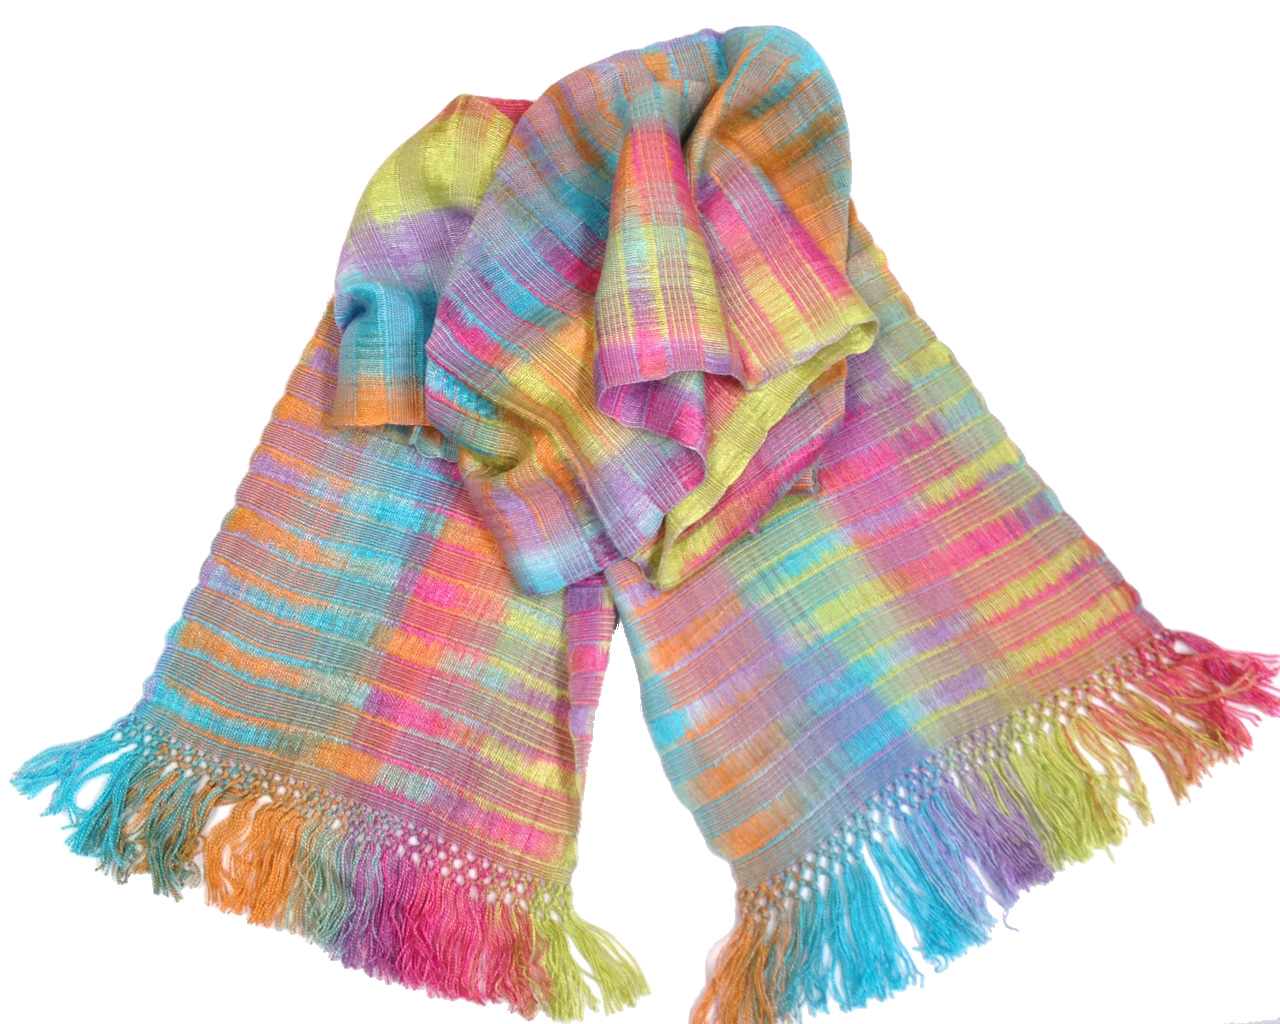 Brilliant Pastels - Lightweight Bamboo Open-Weave Handwoven Scarf 8 x 68